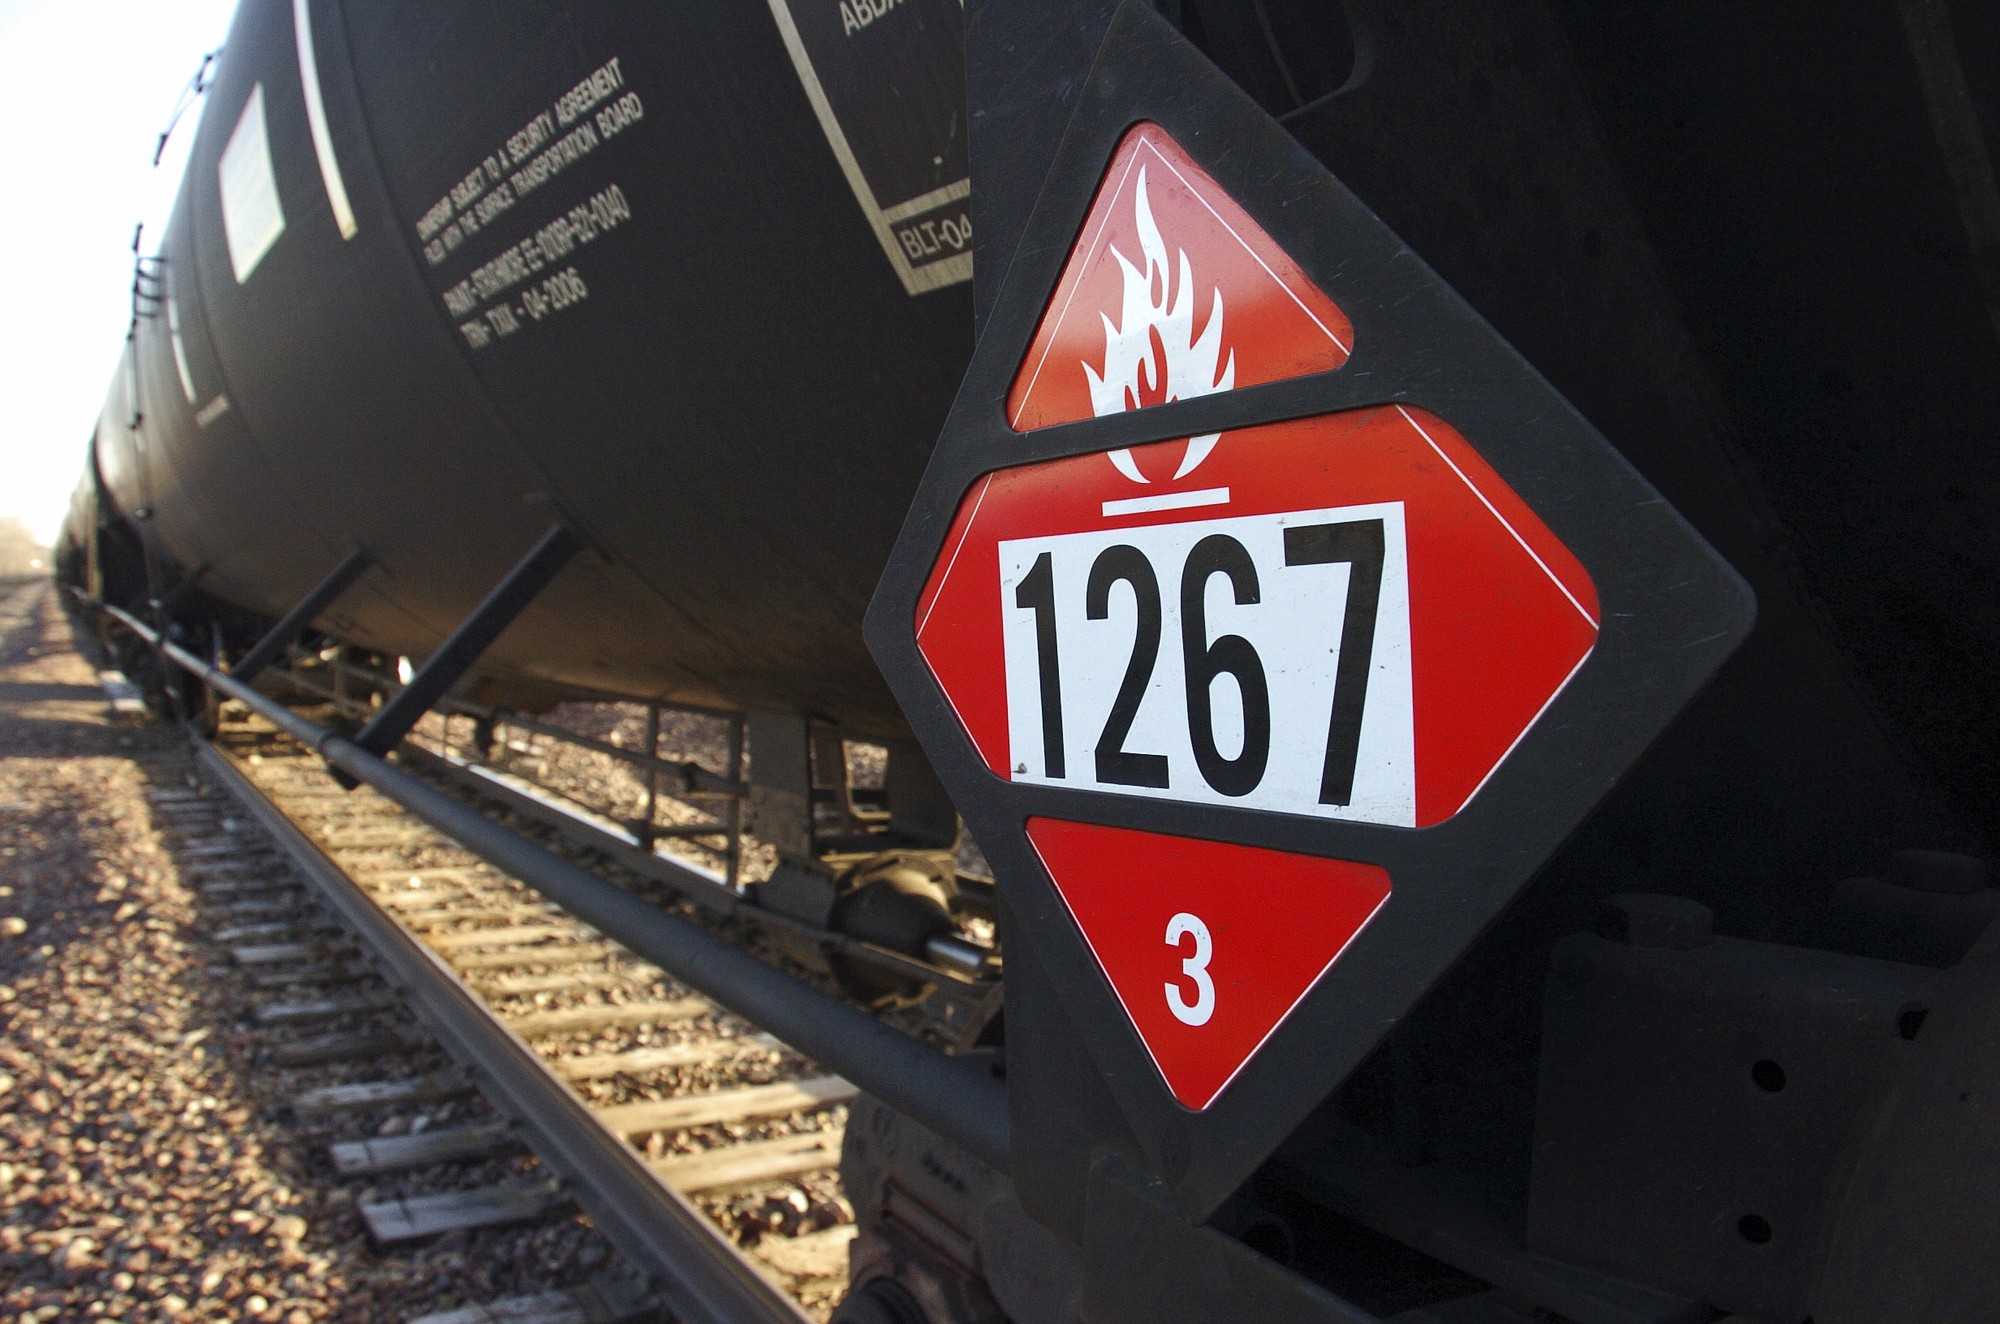 A warning placard on a tank car carrying crude oil near a loading terminal in Trenton, N.D.